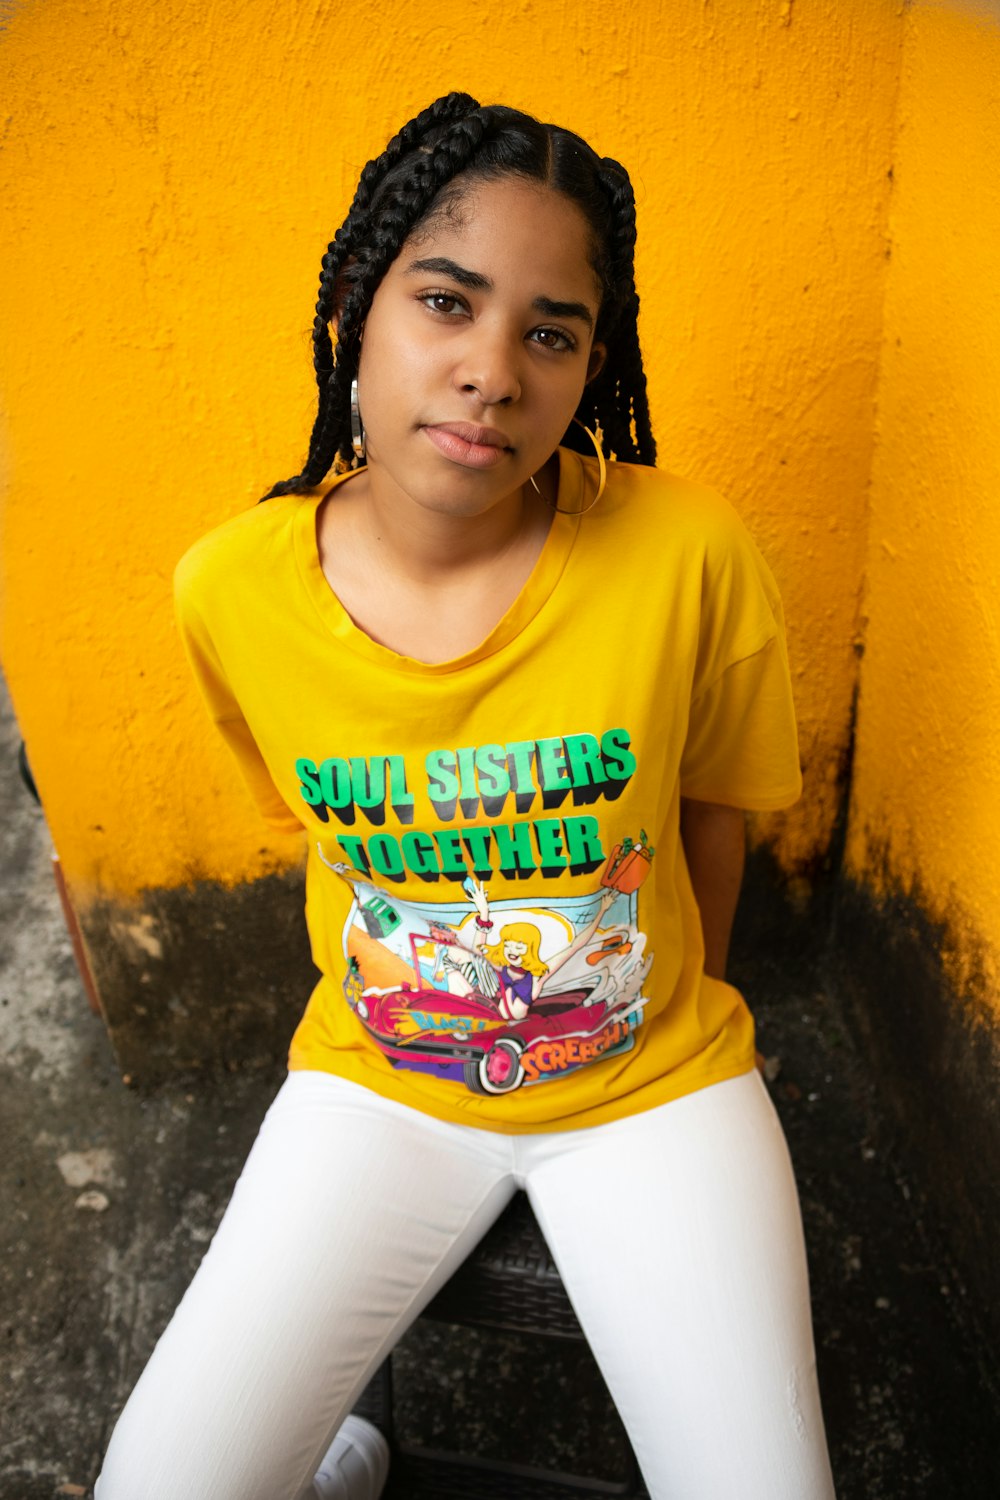 woman in yellow crew neck t-shirt and white pants sitting on white plastic seat